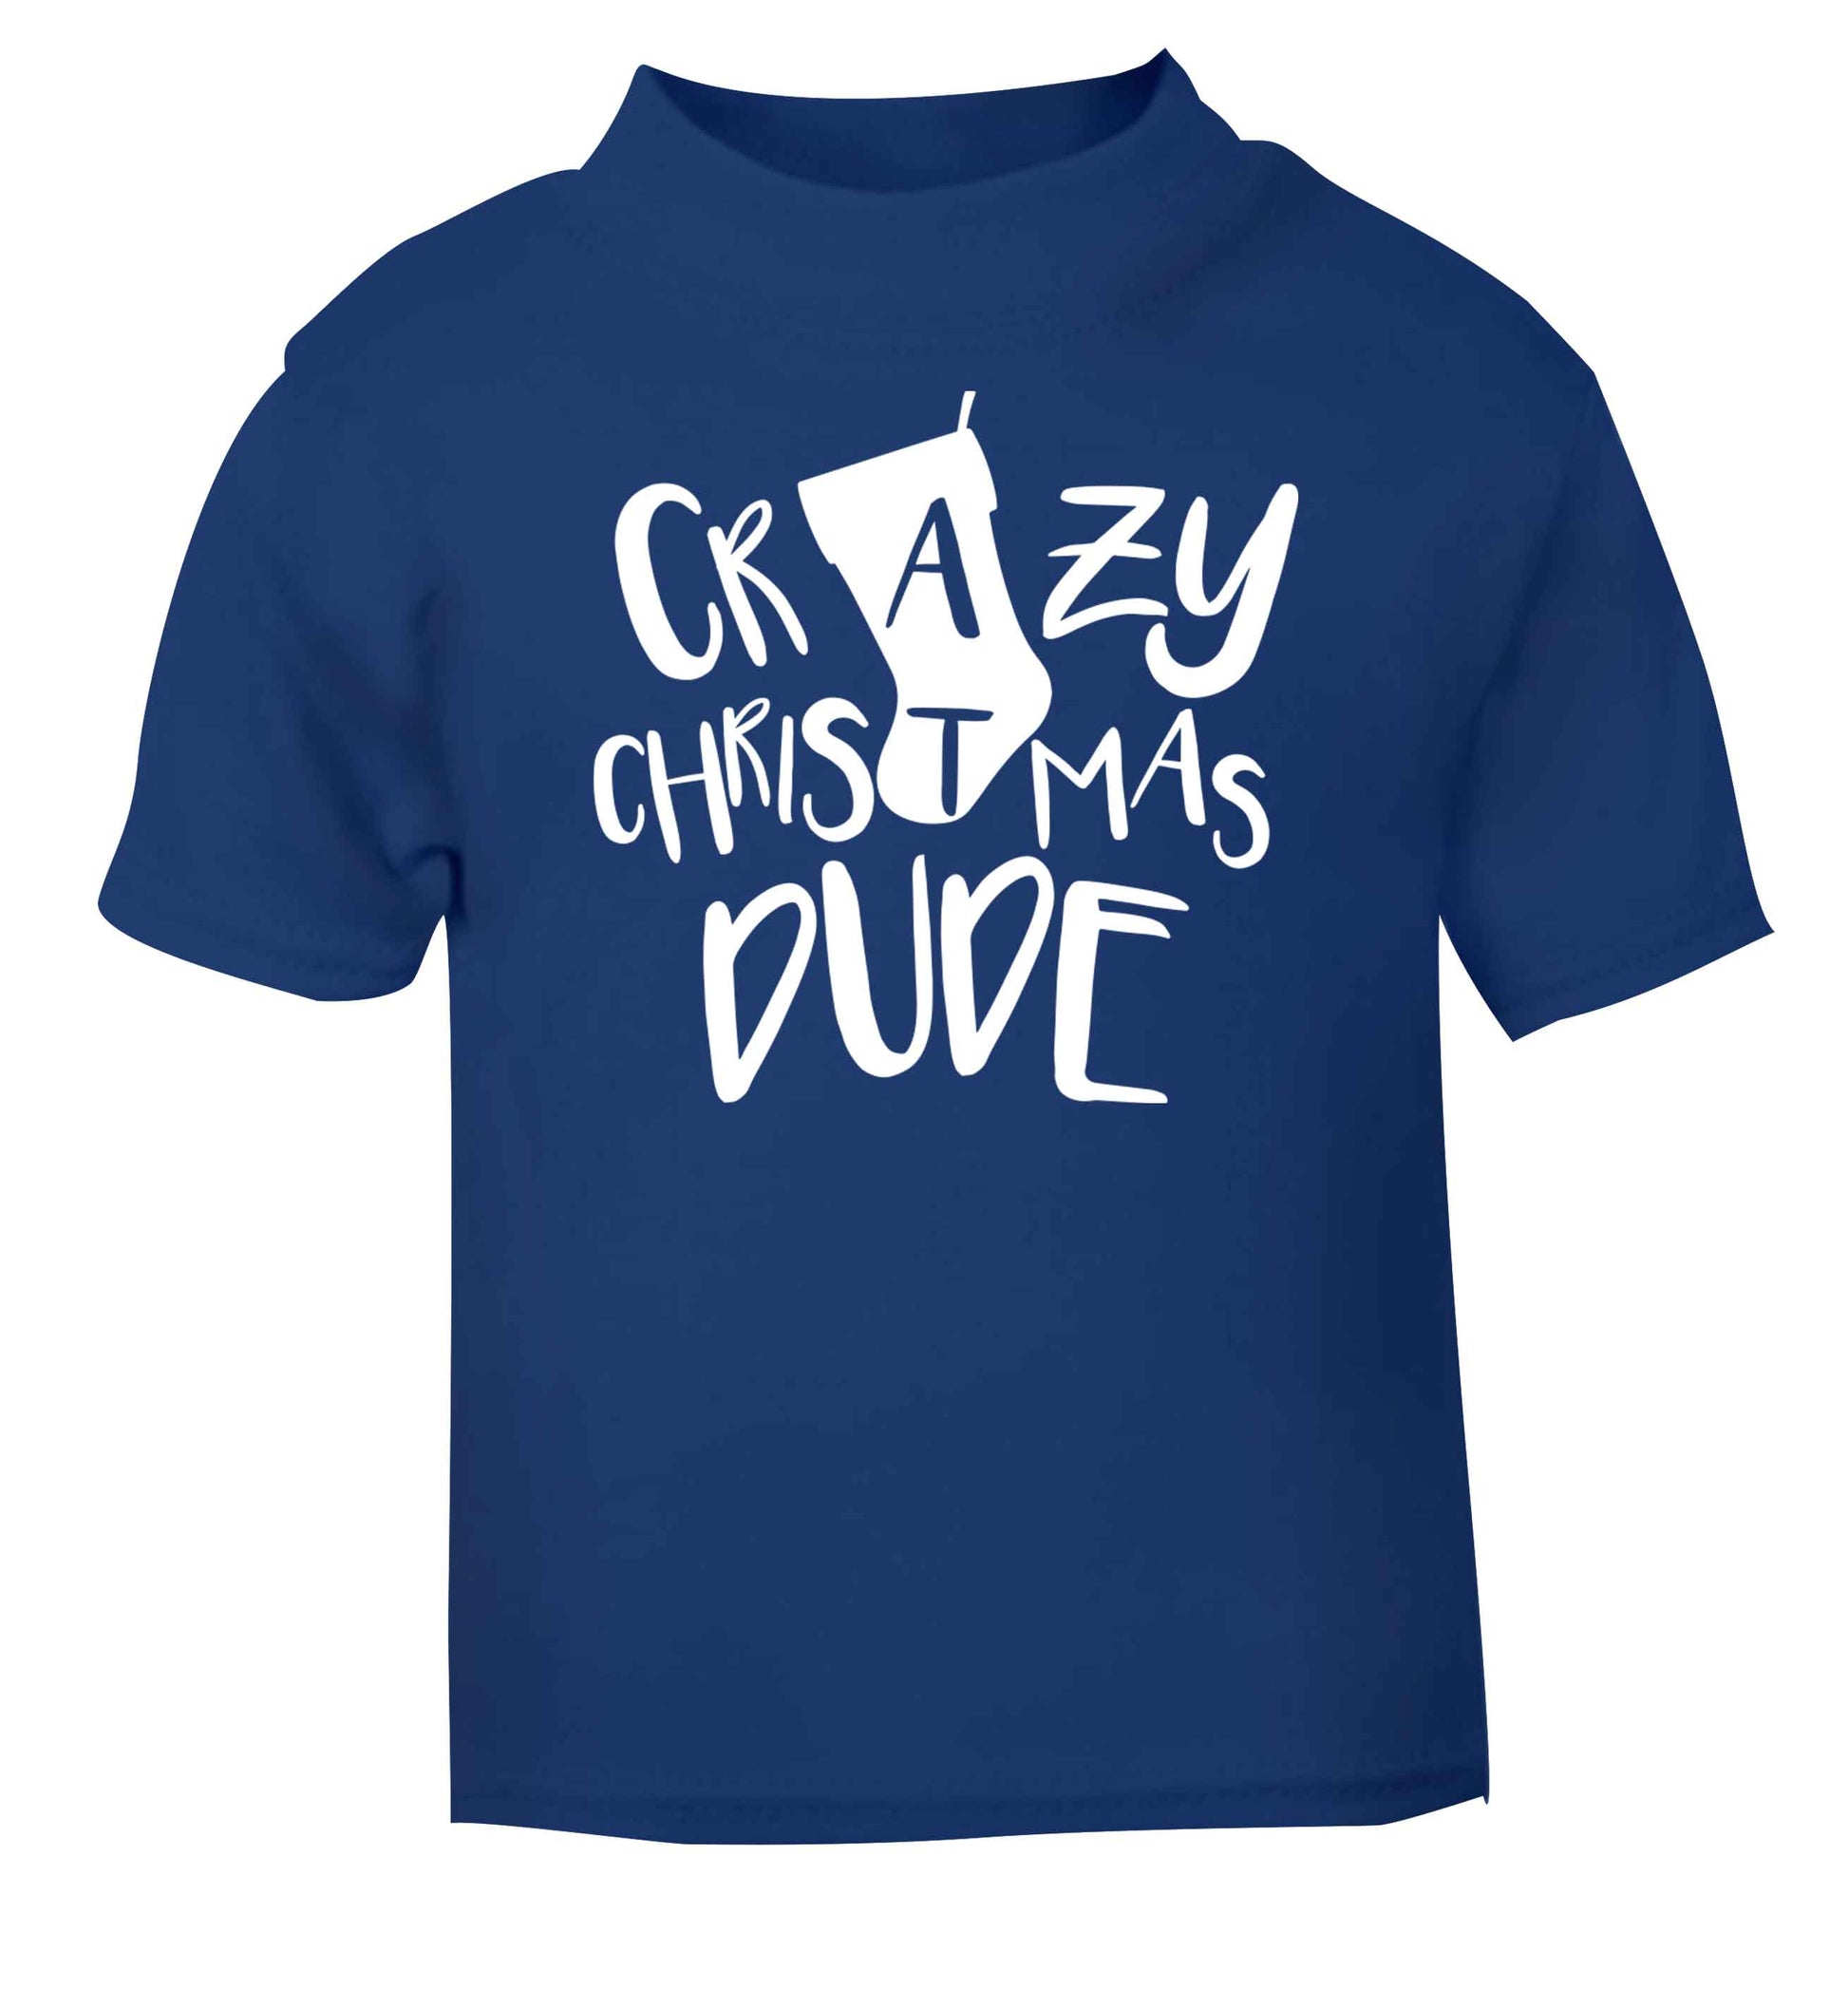 Crazy Christmas Dude blue baby toddler Tshirt 2 Years